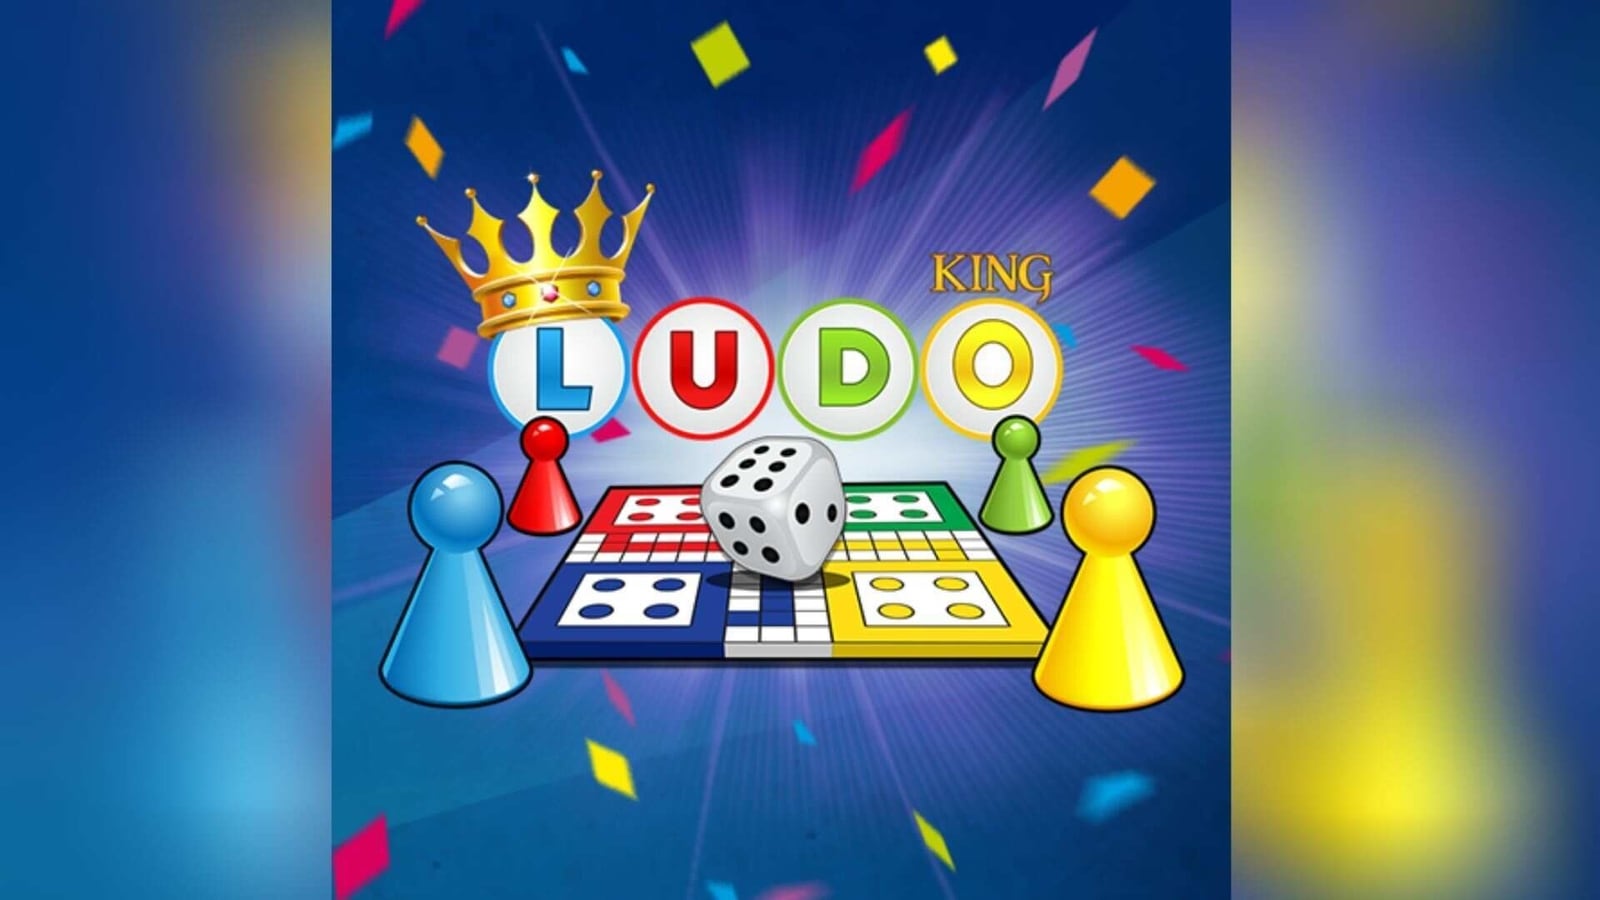 Can Ludo King thrive in a post-Covid world? | HT Tech